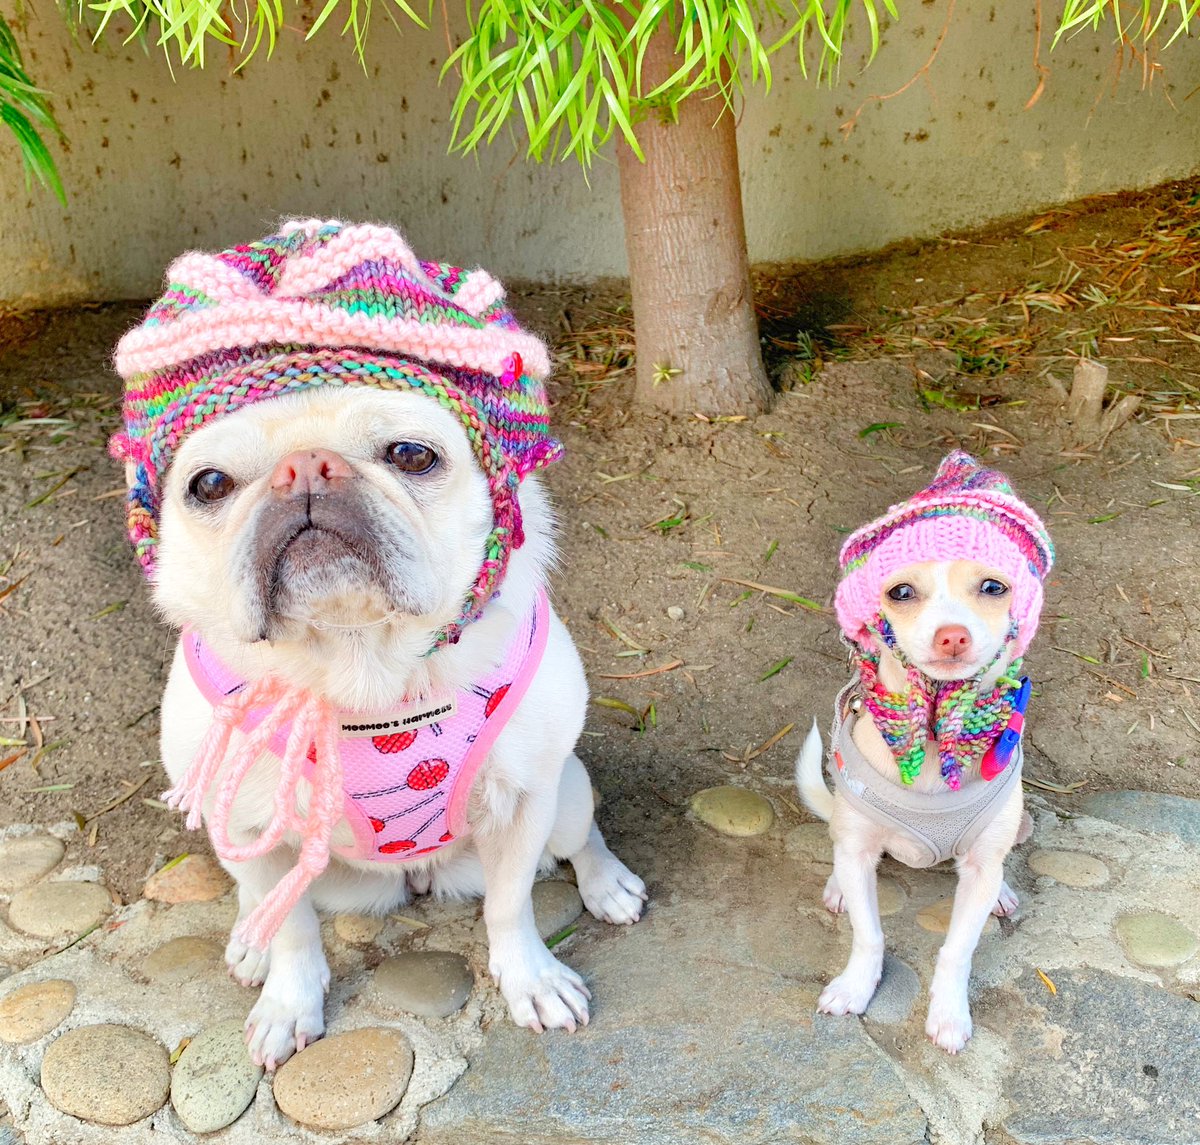 All Dressed Up Ready For The Snow, At The Beach!!!!! Thank you @sarahdrake5128 For The Awesome, Handmade Beanies!! We Love Our Beanies😘😘😘
#beanies #doghat #lumberjacks #snowday #beachlife #handmadehats #crafty #dogsinhat #surfgidgetthepug #surfdog